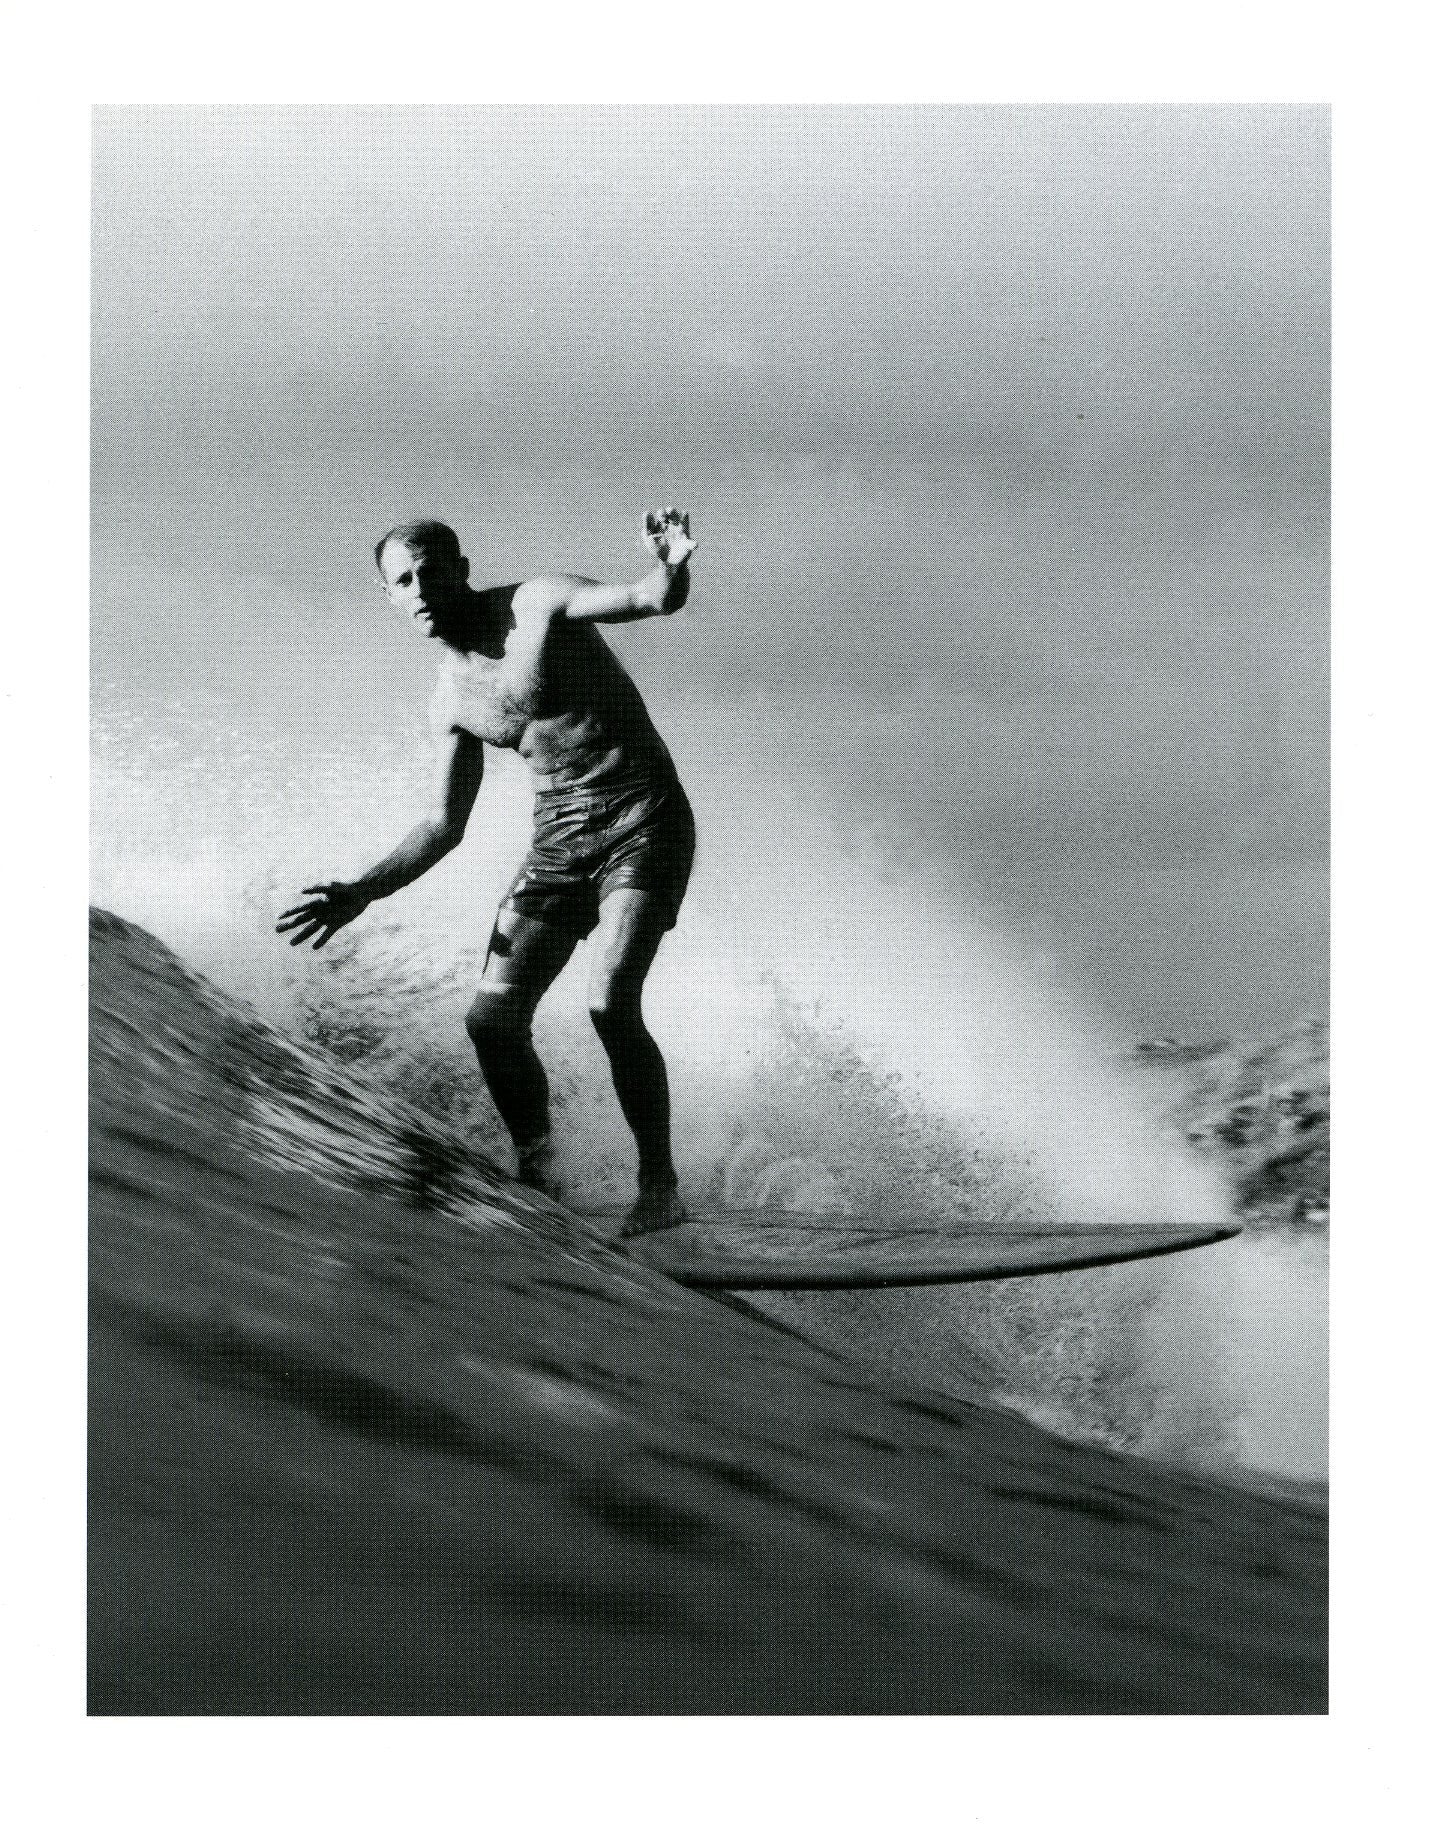 Surfing: Historic Images from Bishop Museum Archives Notecards